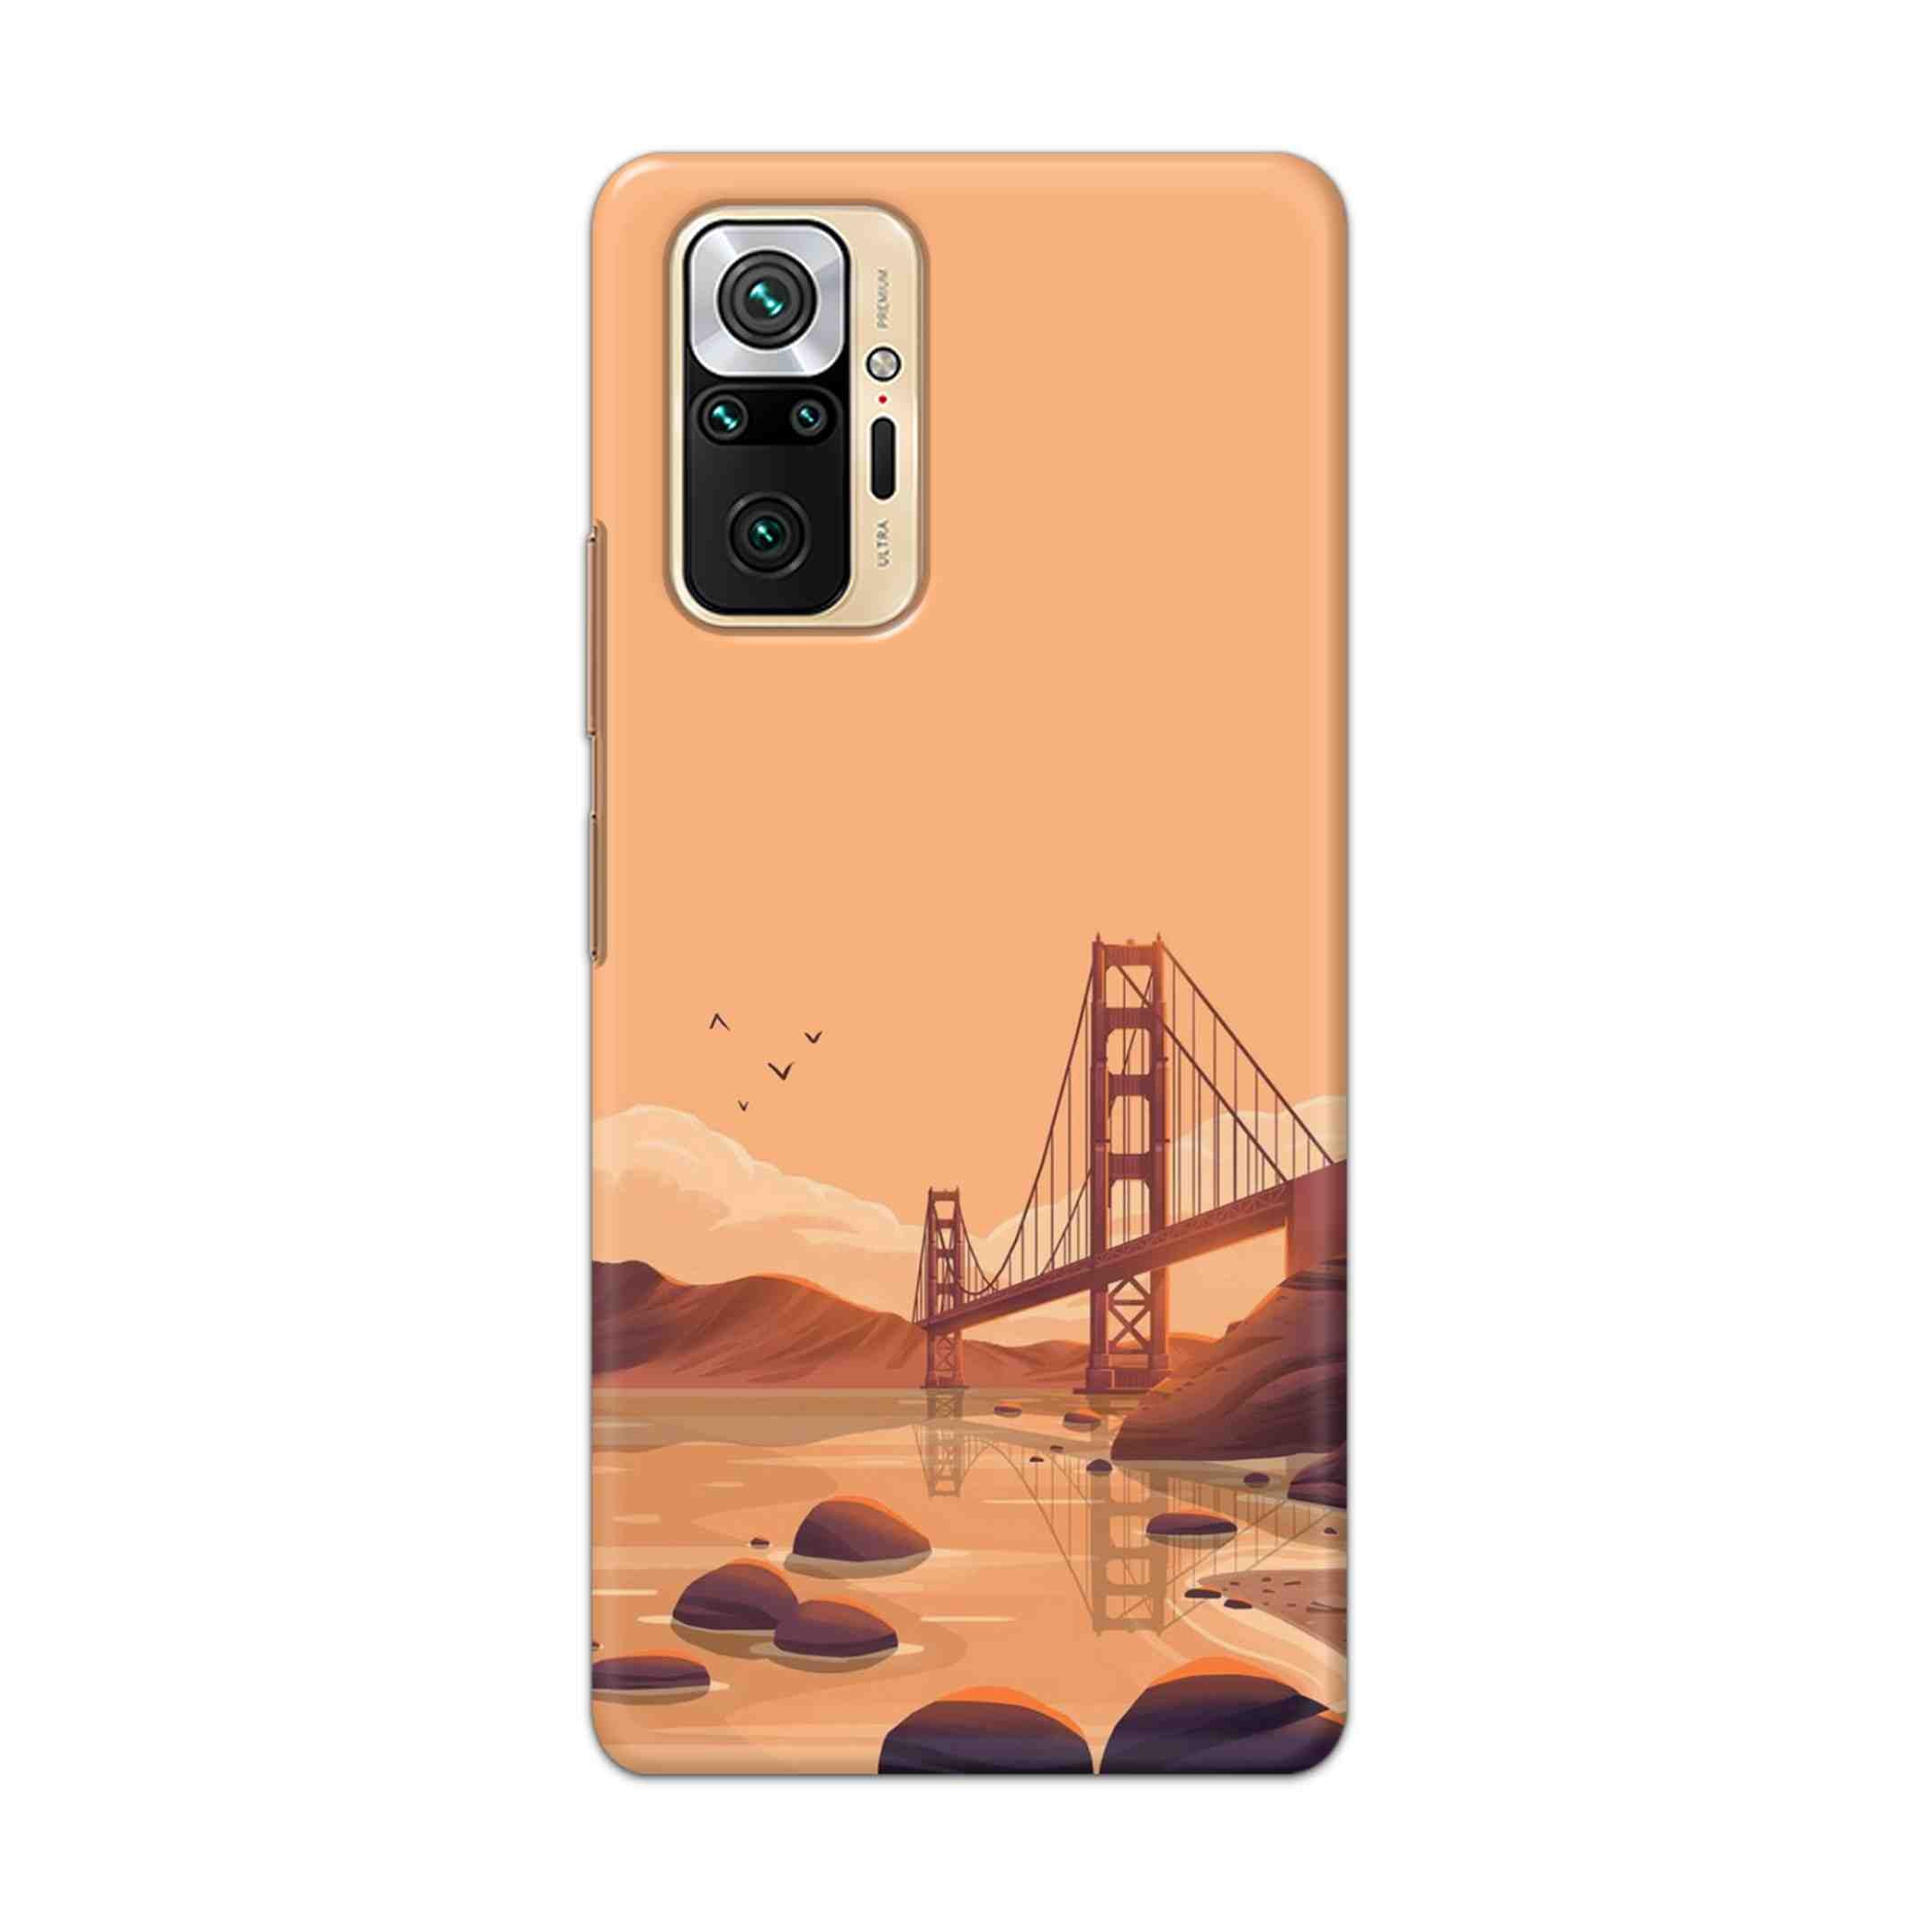 Buy San Francisco Hard Back Mobile Phone Case Cover For Redmi Note 10 Pro Online